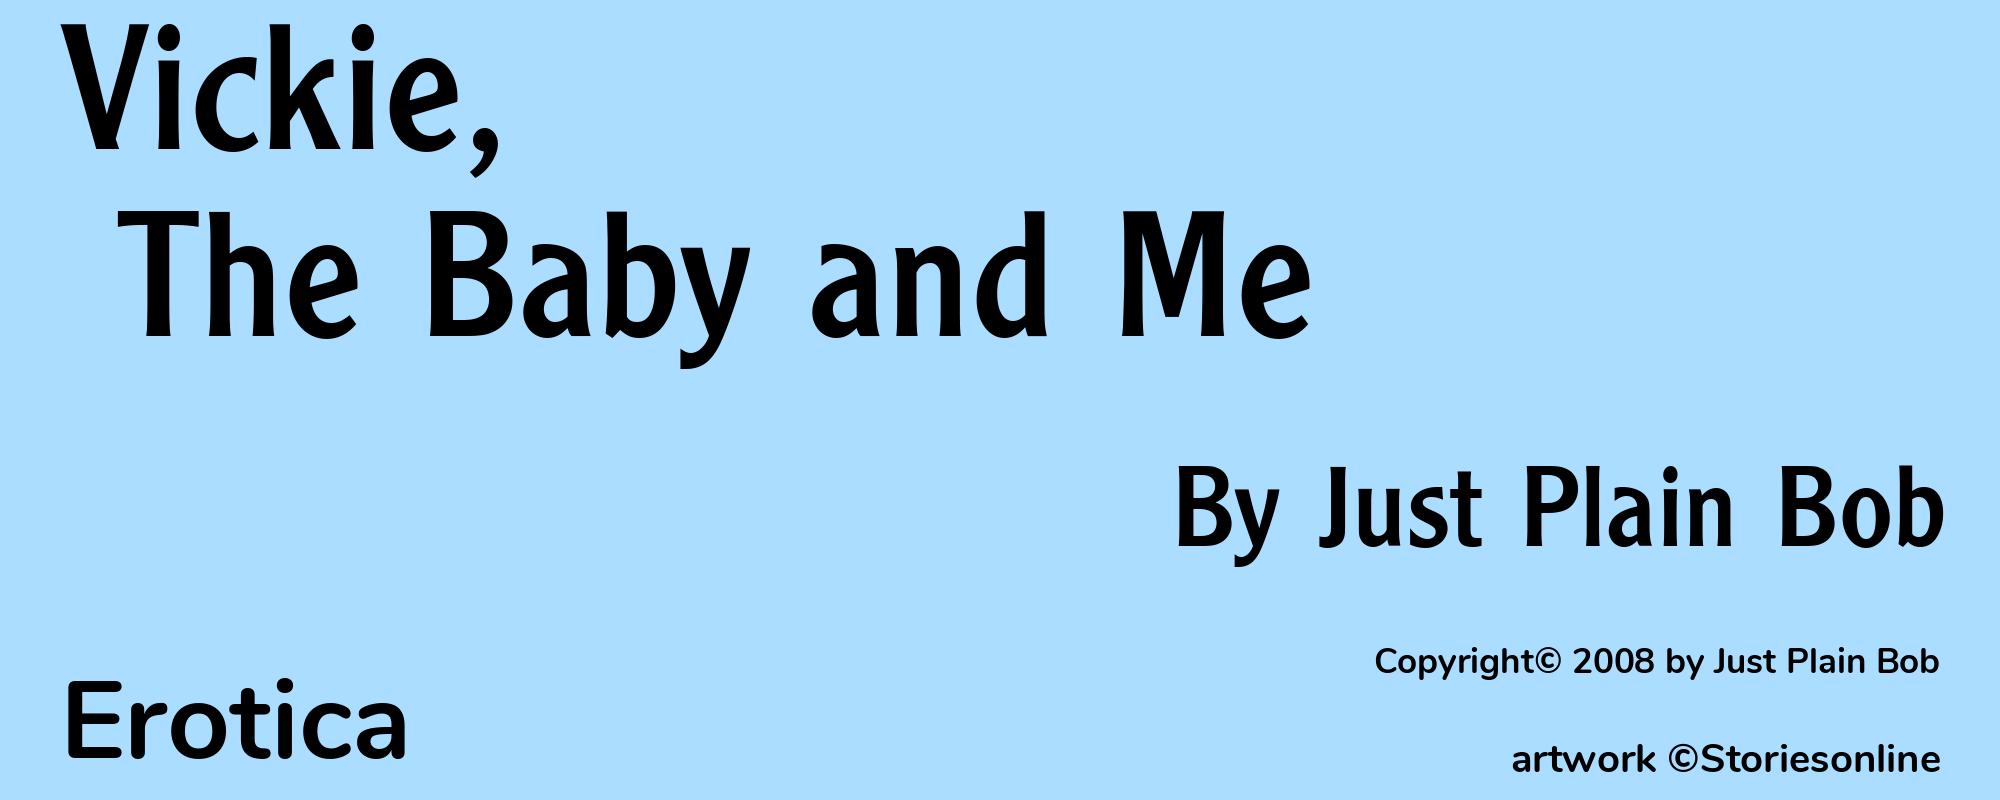 Vickie, The Baby and Me - Cover